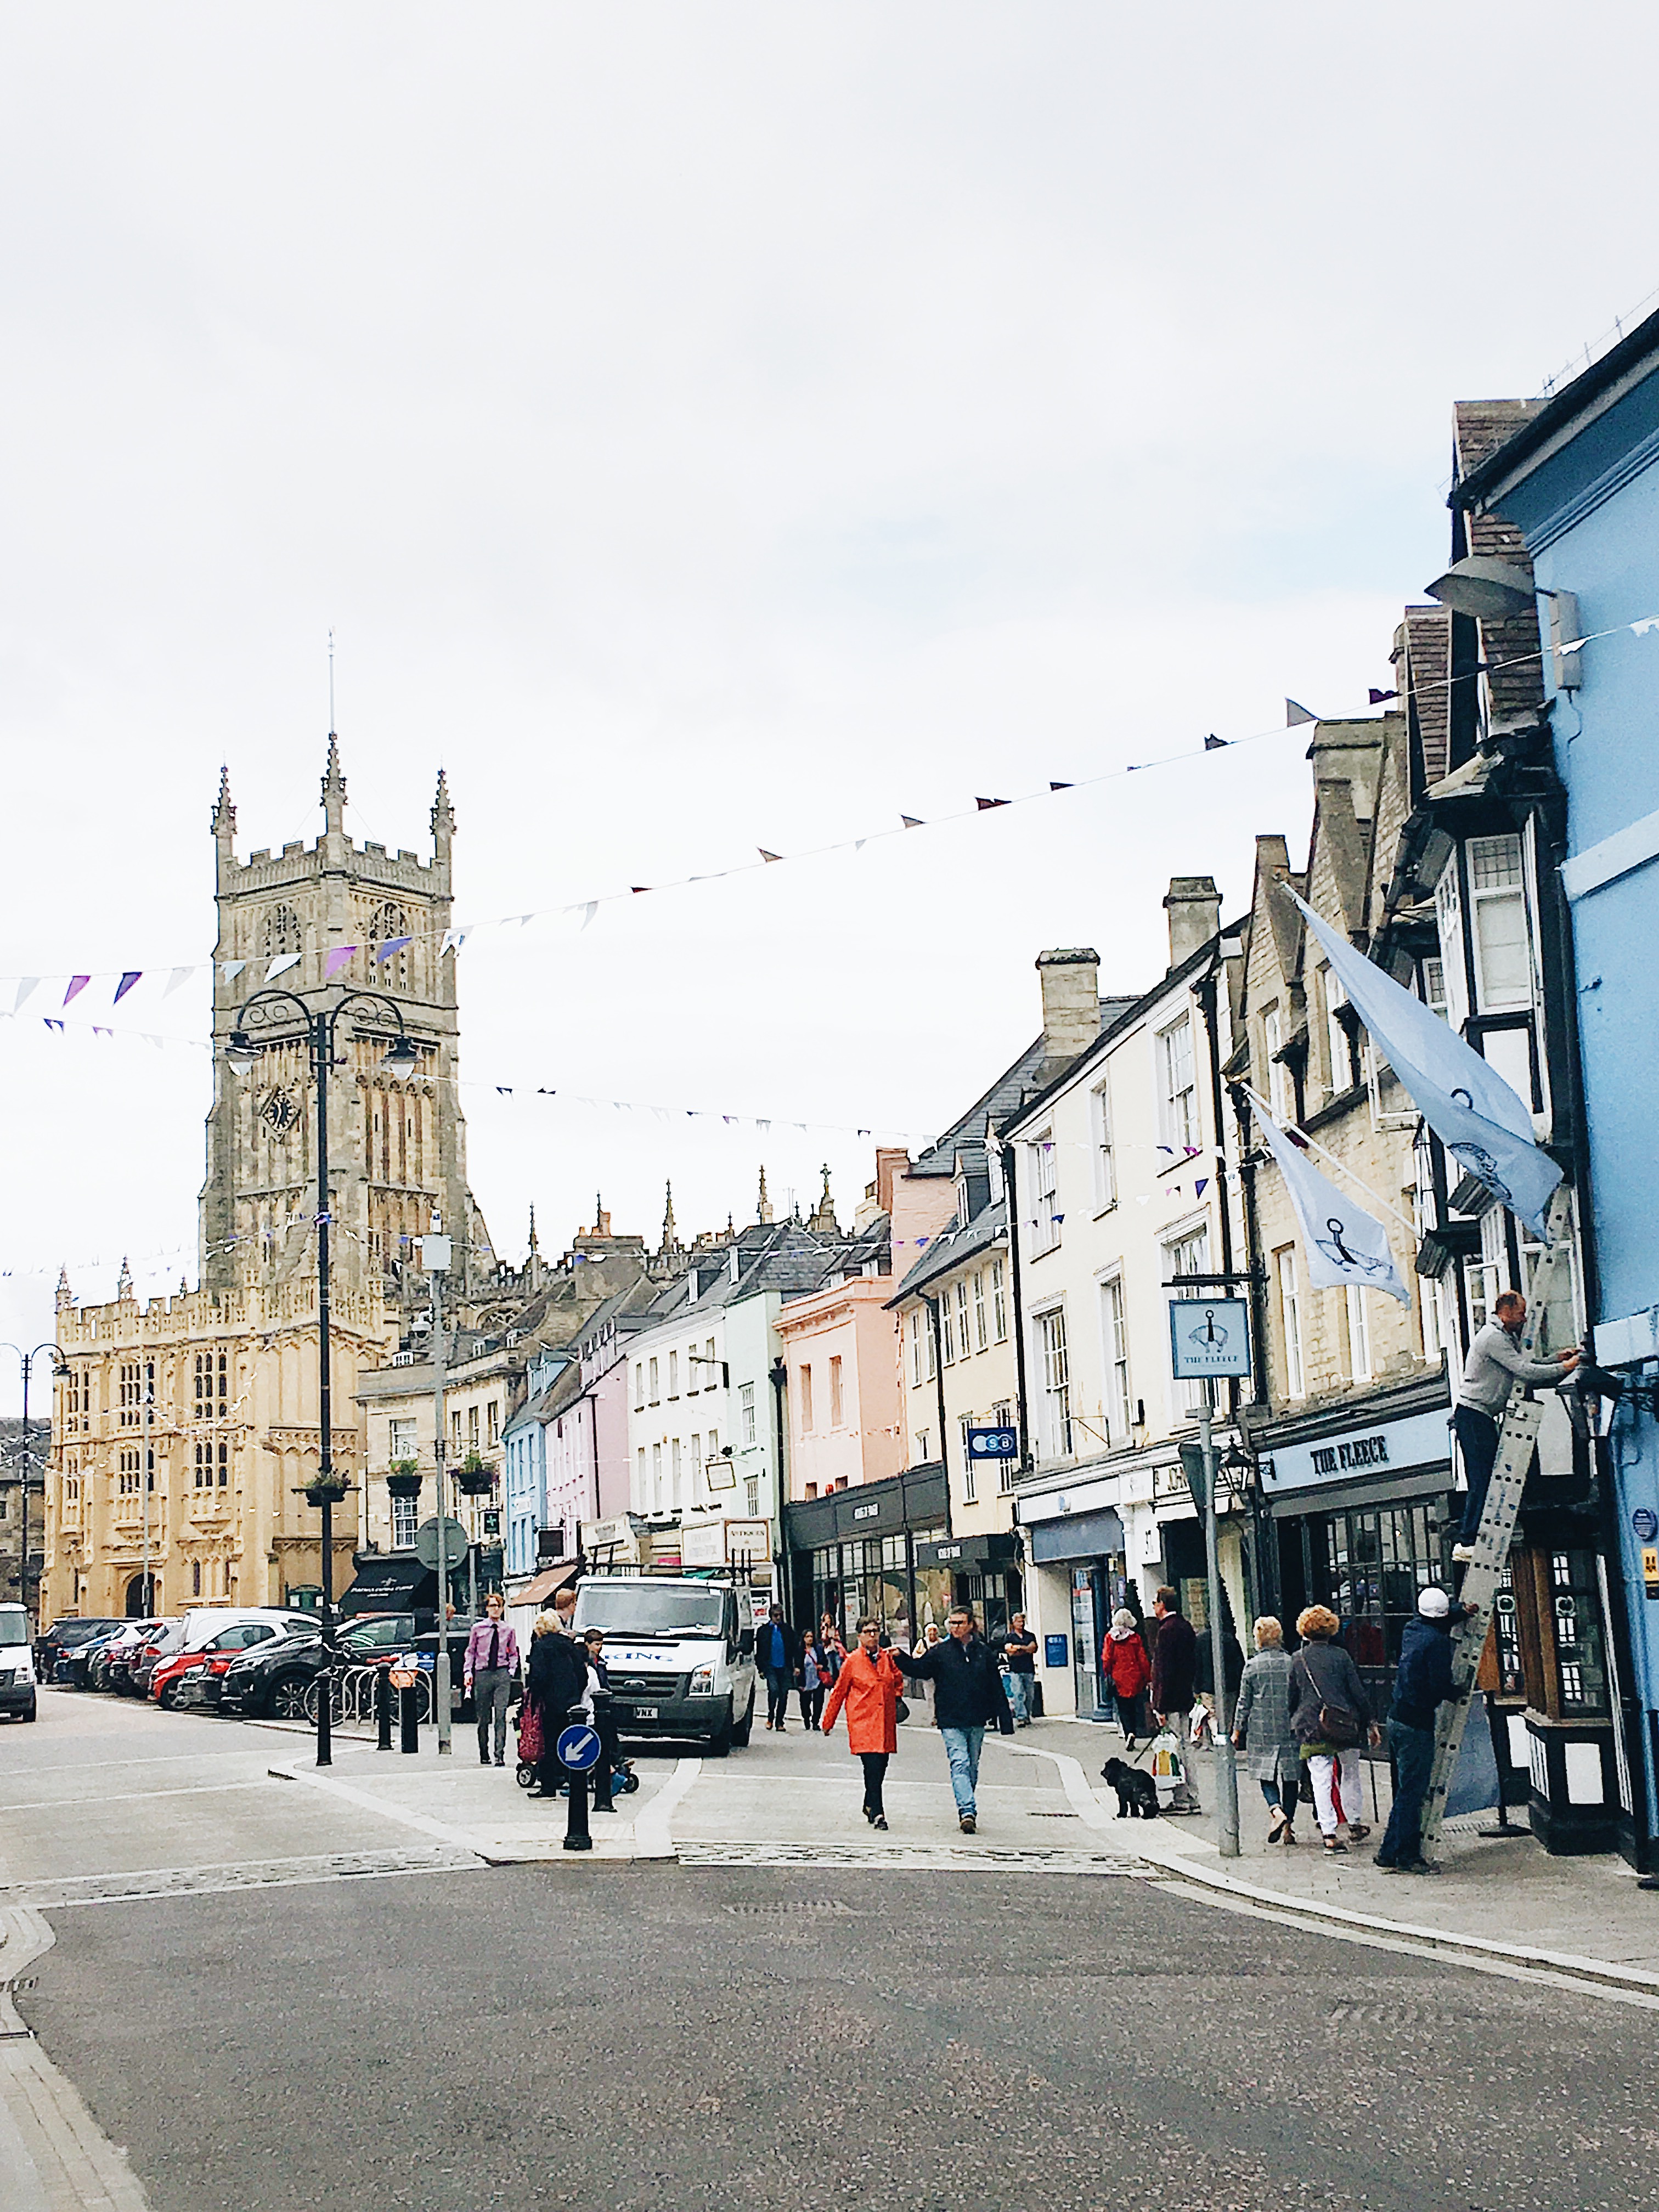 Colorful town of Cirencester